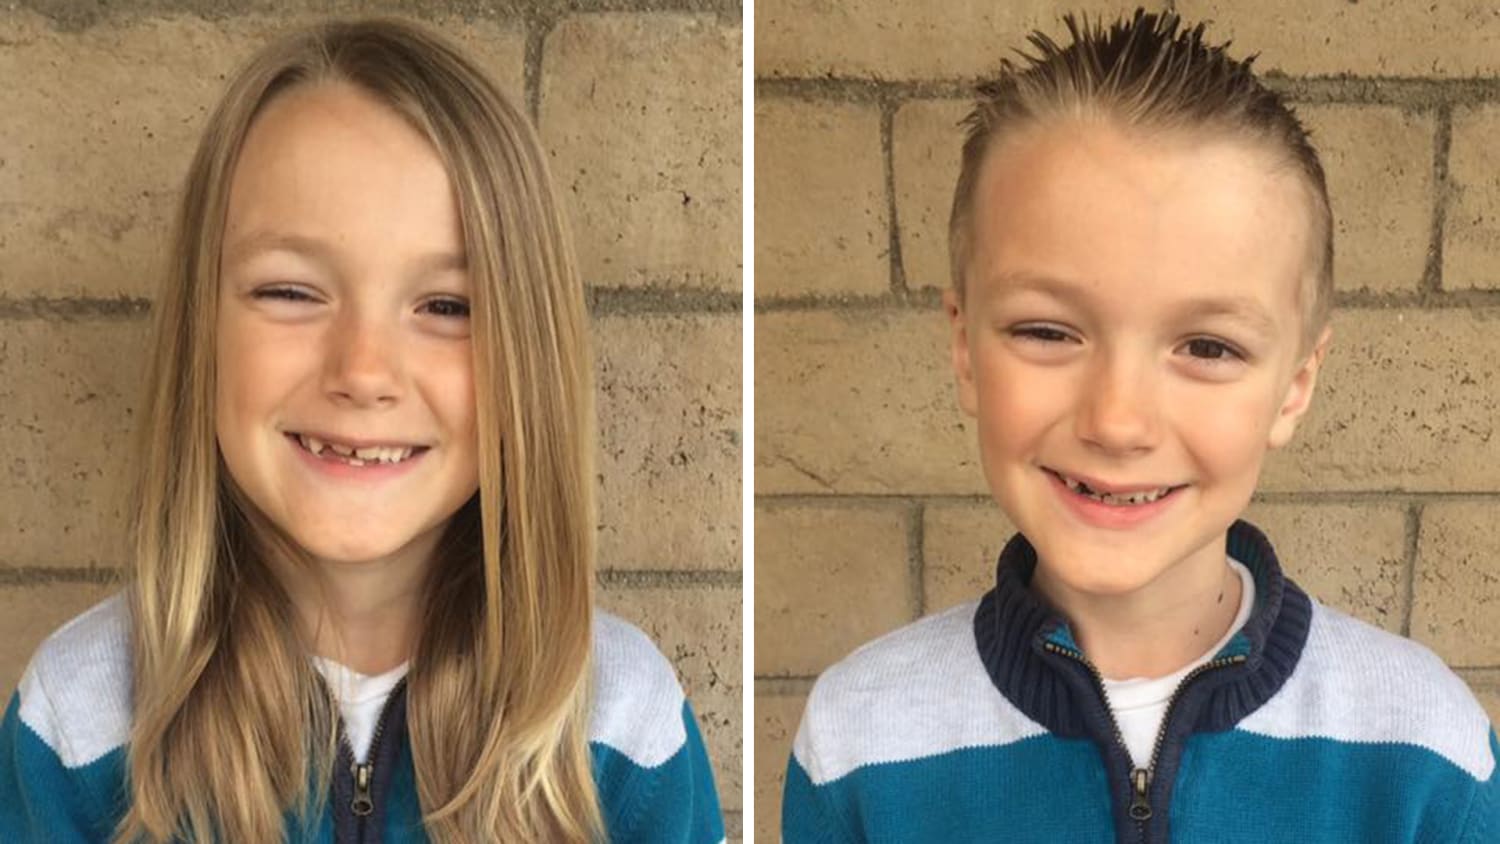 After donating his hair for wigs, boy diagnosed with cancer